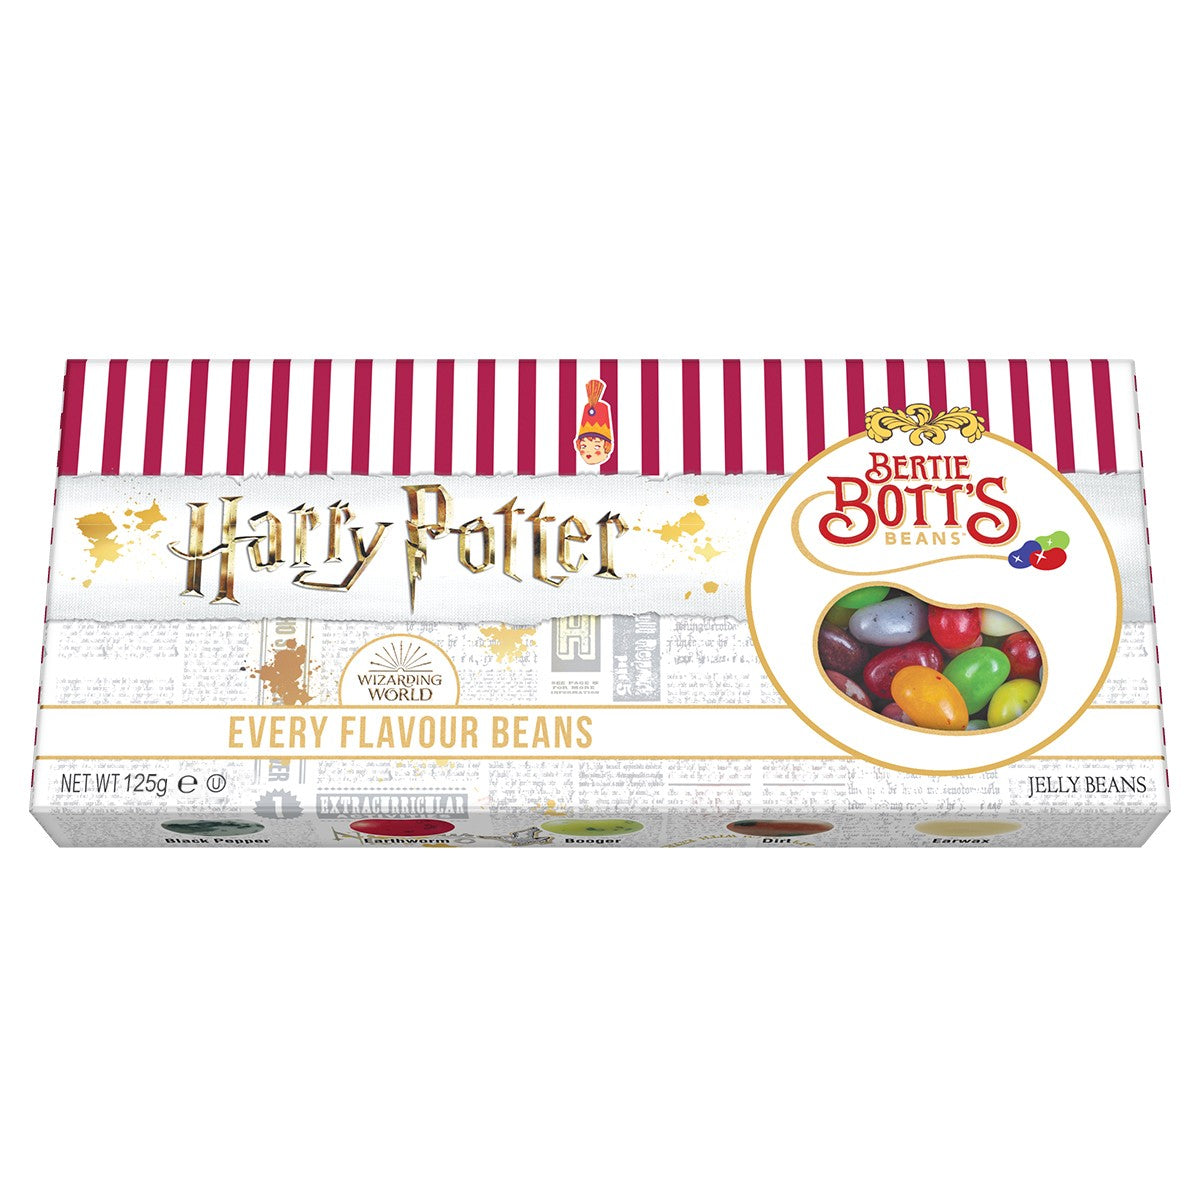 Harry Potter Bertie Botts Beans Every Flavour Beans Gift Box - 125g